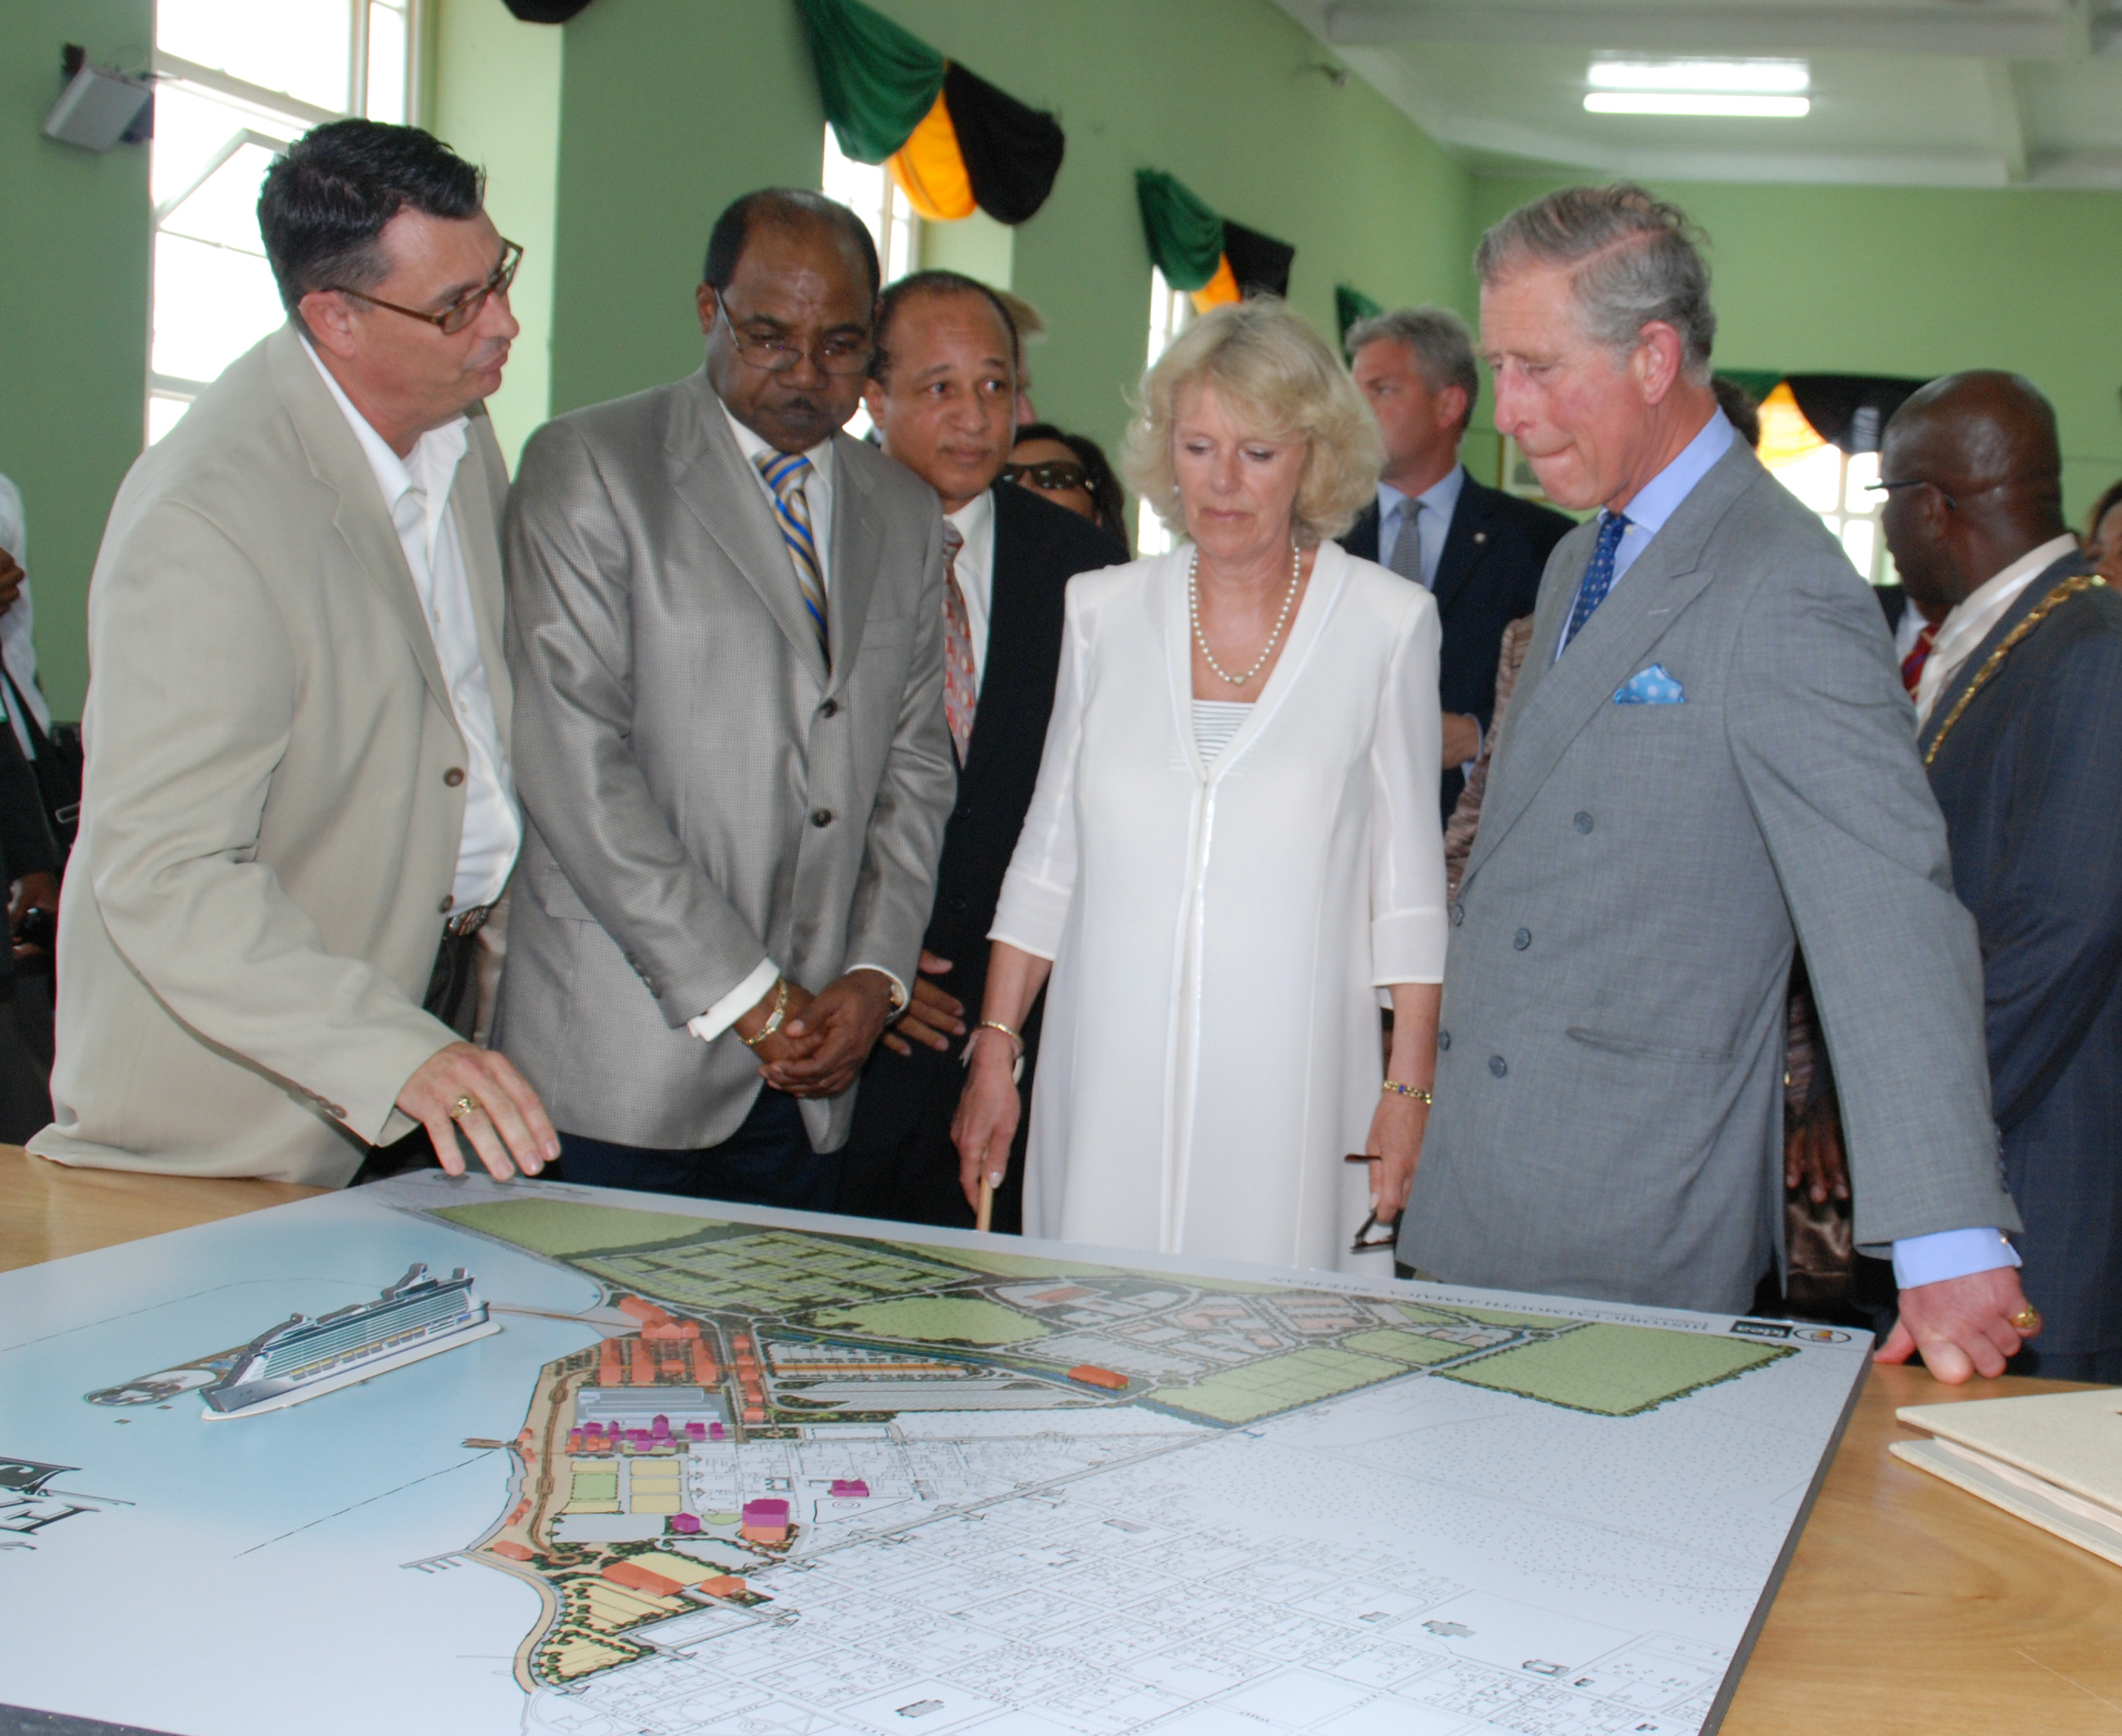 Their Royal Highnesses Prince of Wales (2nd right) and Duchess of Cornwall (centre) listen attentively to development plans for the 18th Century Commercial Capital, Falmouth from Idea's Hugh Darley on Thursday afternoon. Minister of Tourism, Edmund Bartlett (2nd left) and Custos Roylan Barrett share in the occassion.